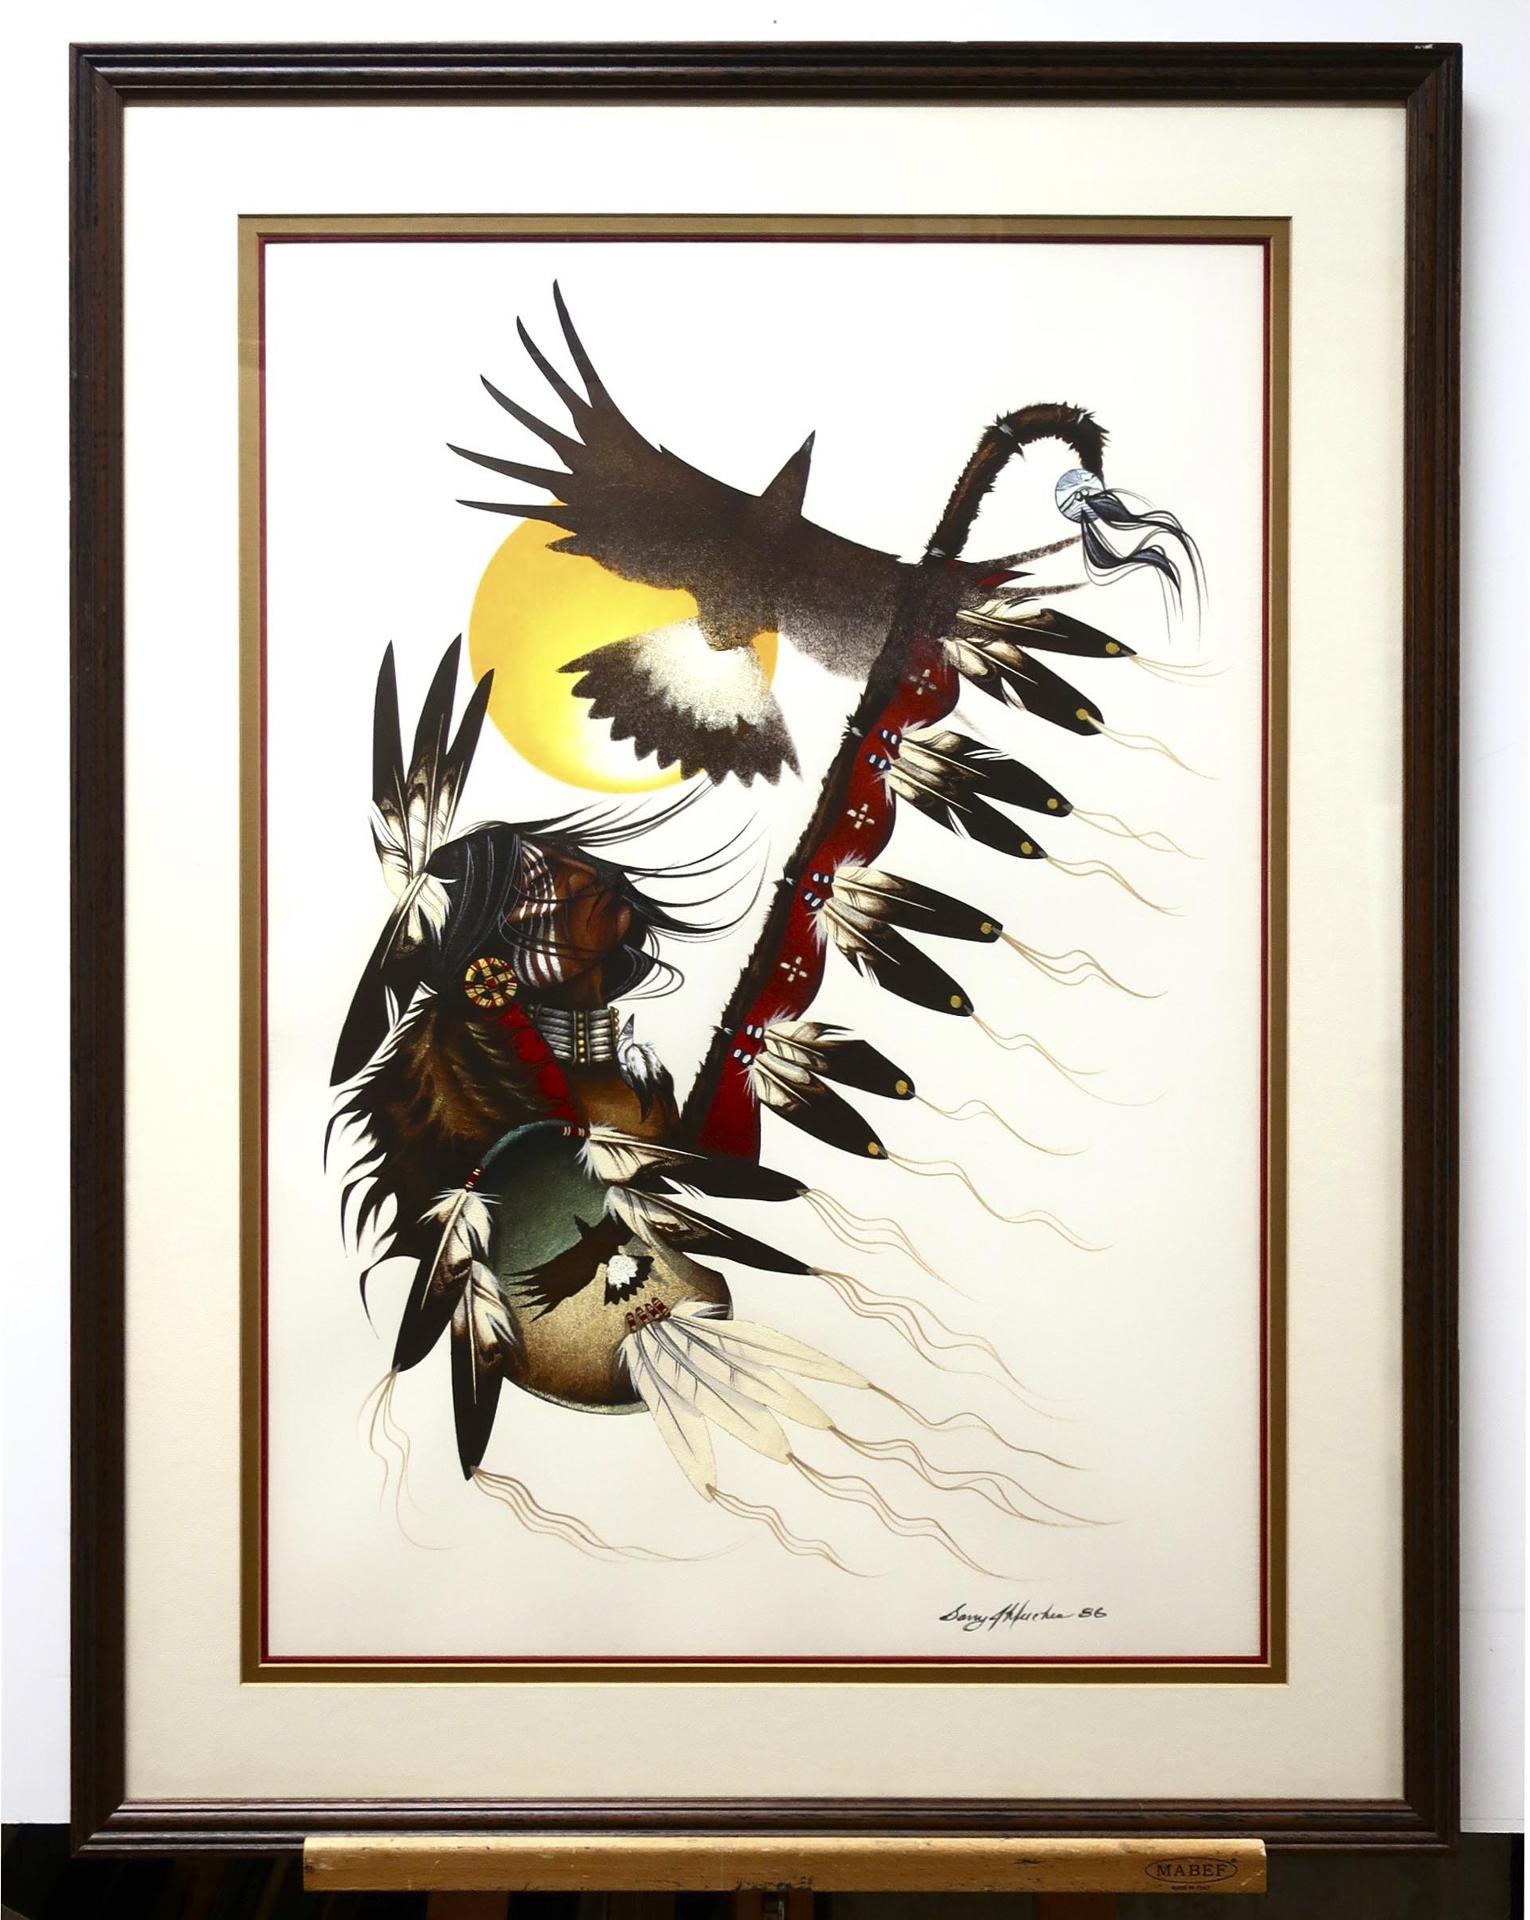 Garry J. Meeches (1957) - Untitled (Warrior With Eagle And Sun)